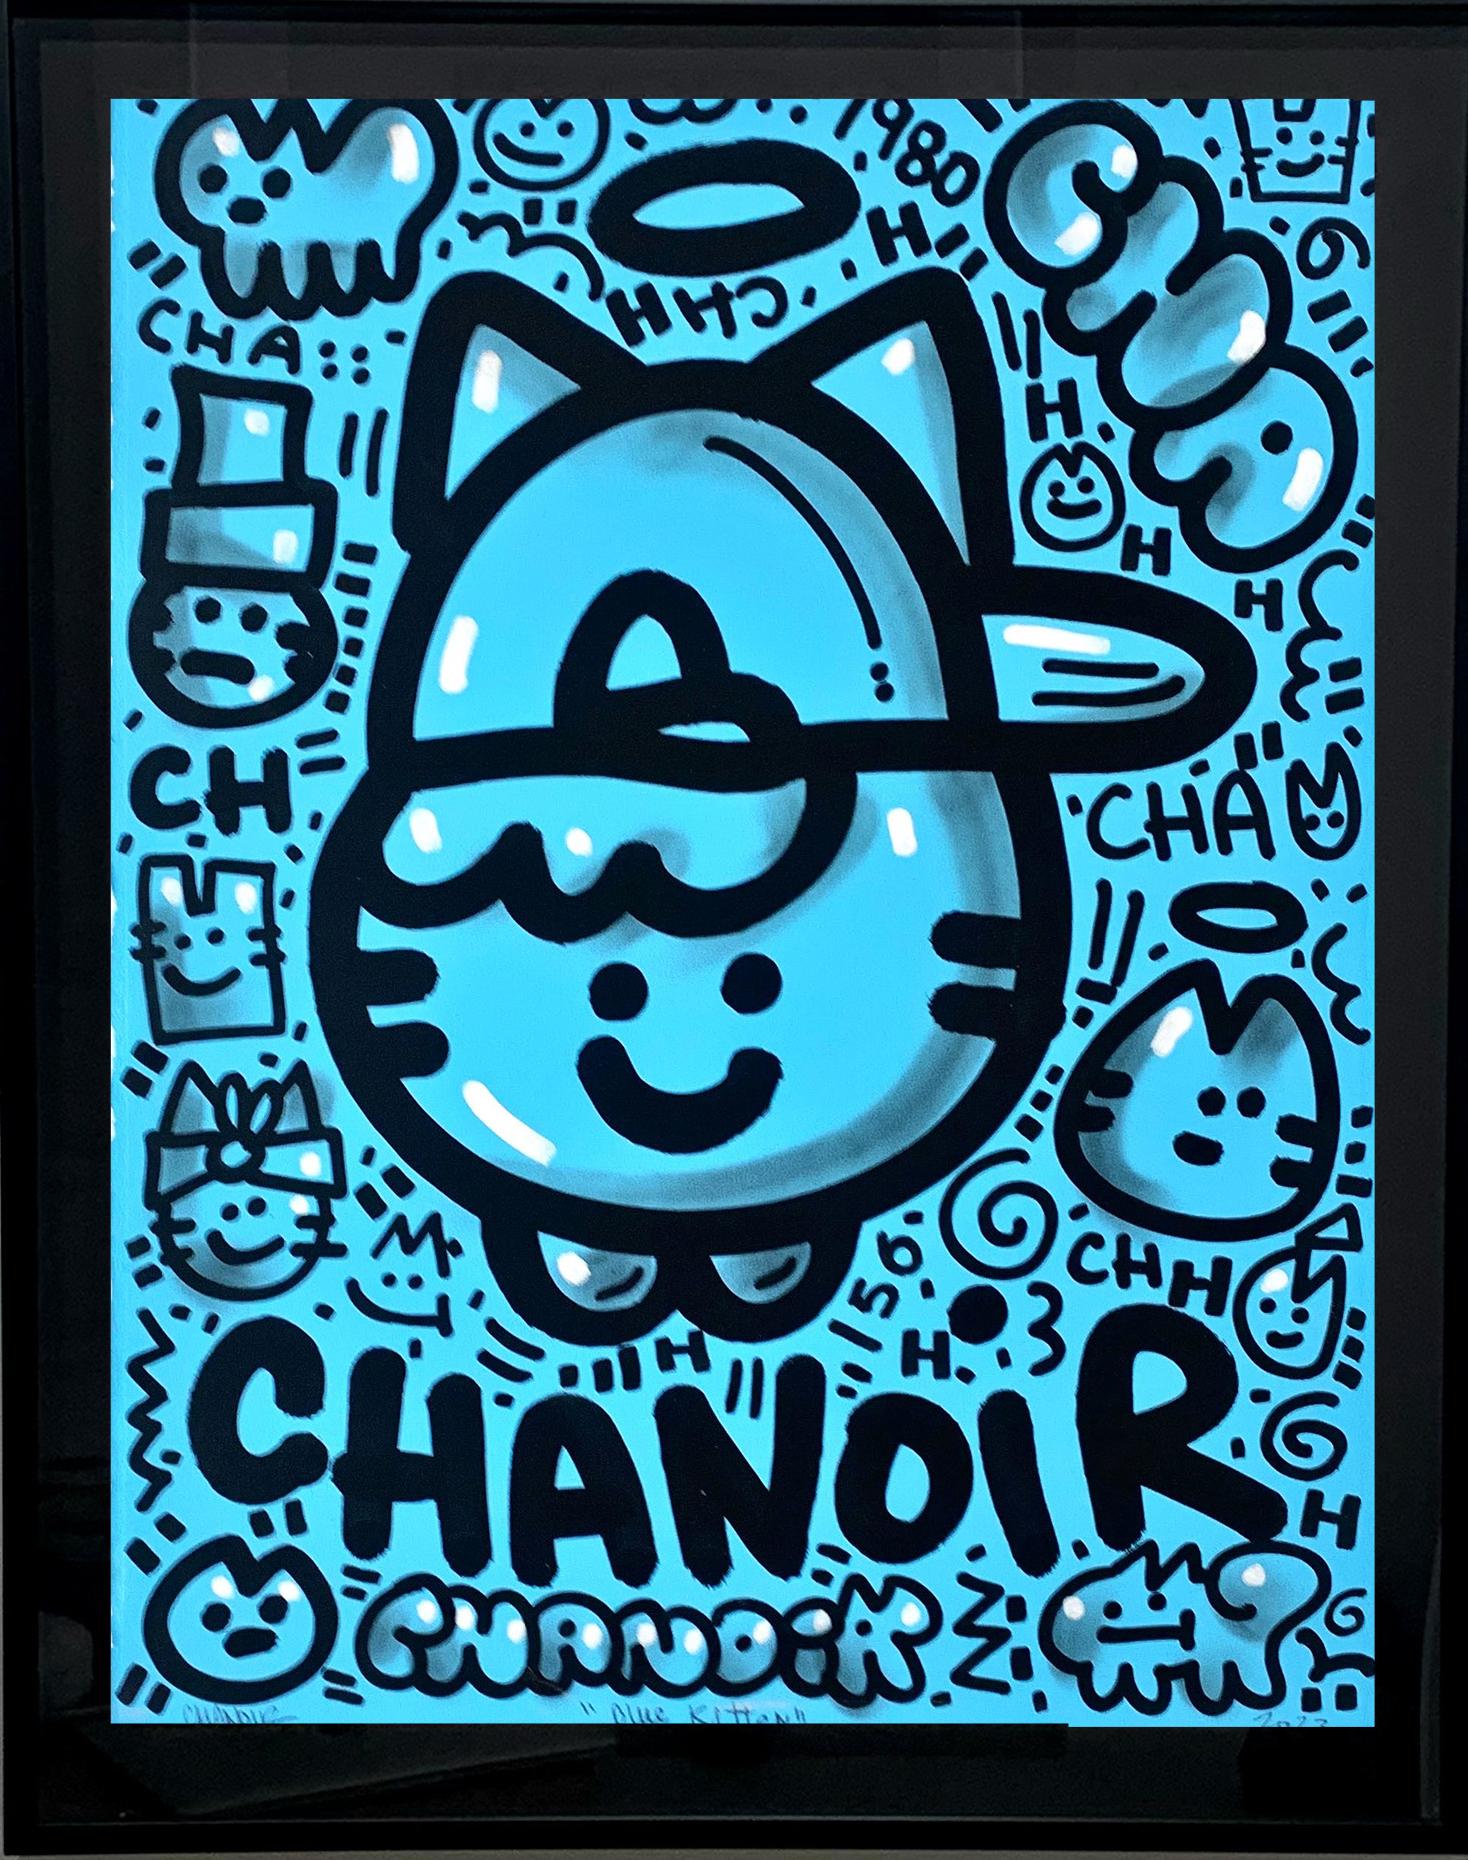 BLUE KITTEN by CHANOIR, French Urban Artist, Acrylic and Spray on Paper - Painting by Chanoir